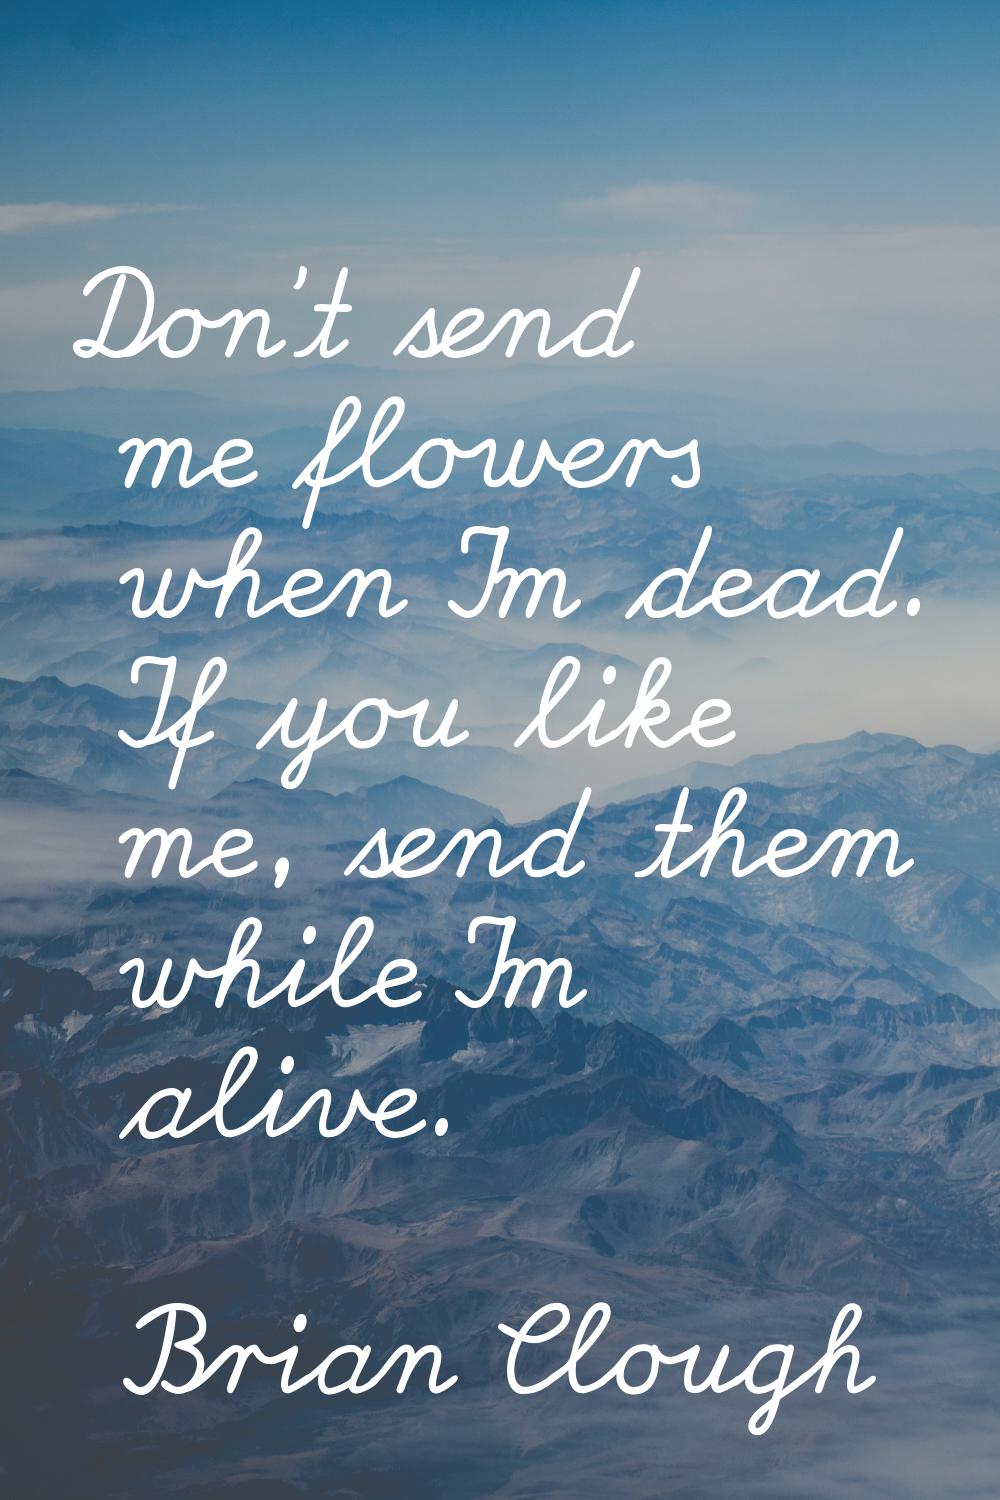 Don't send me flowers when I'm dead. If you like me, send them while I'm alive.